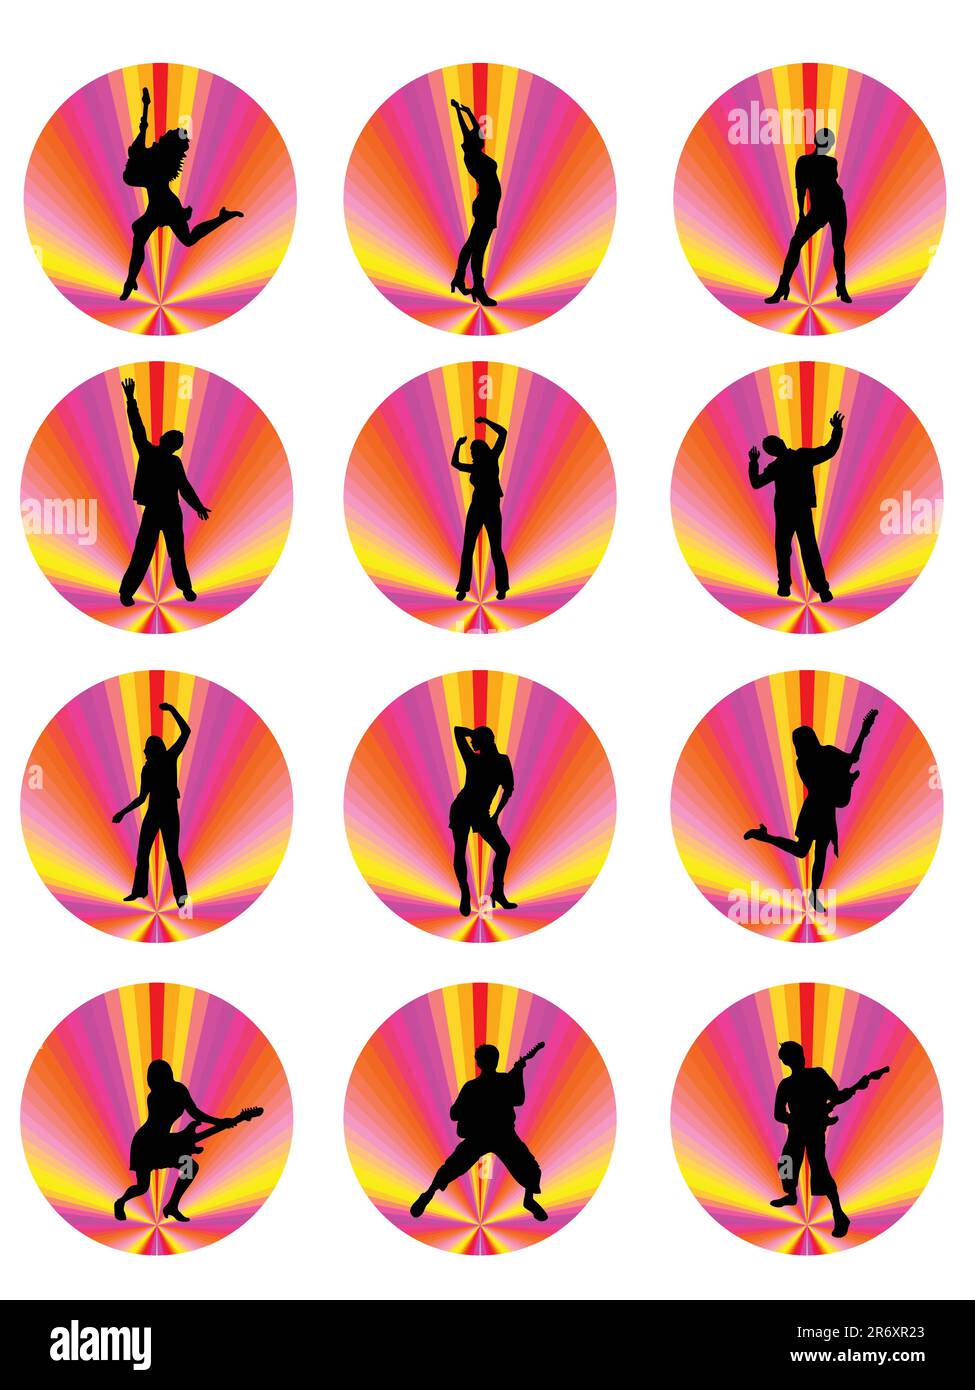 vector illustration of different silhouettes of young people Stock ...